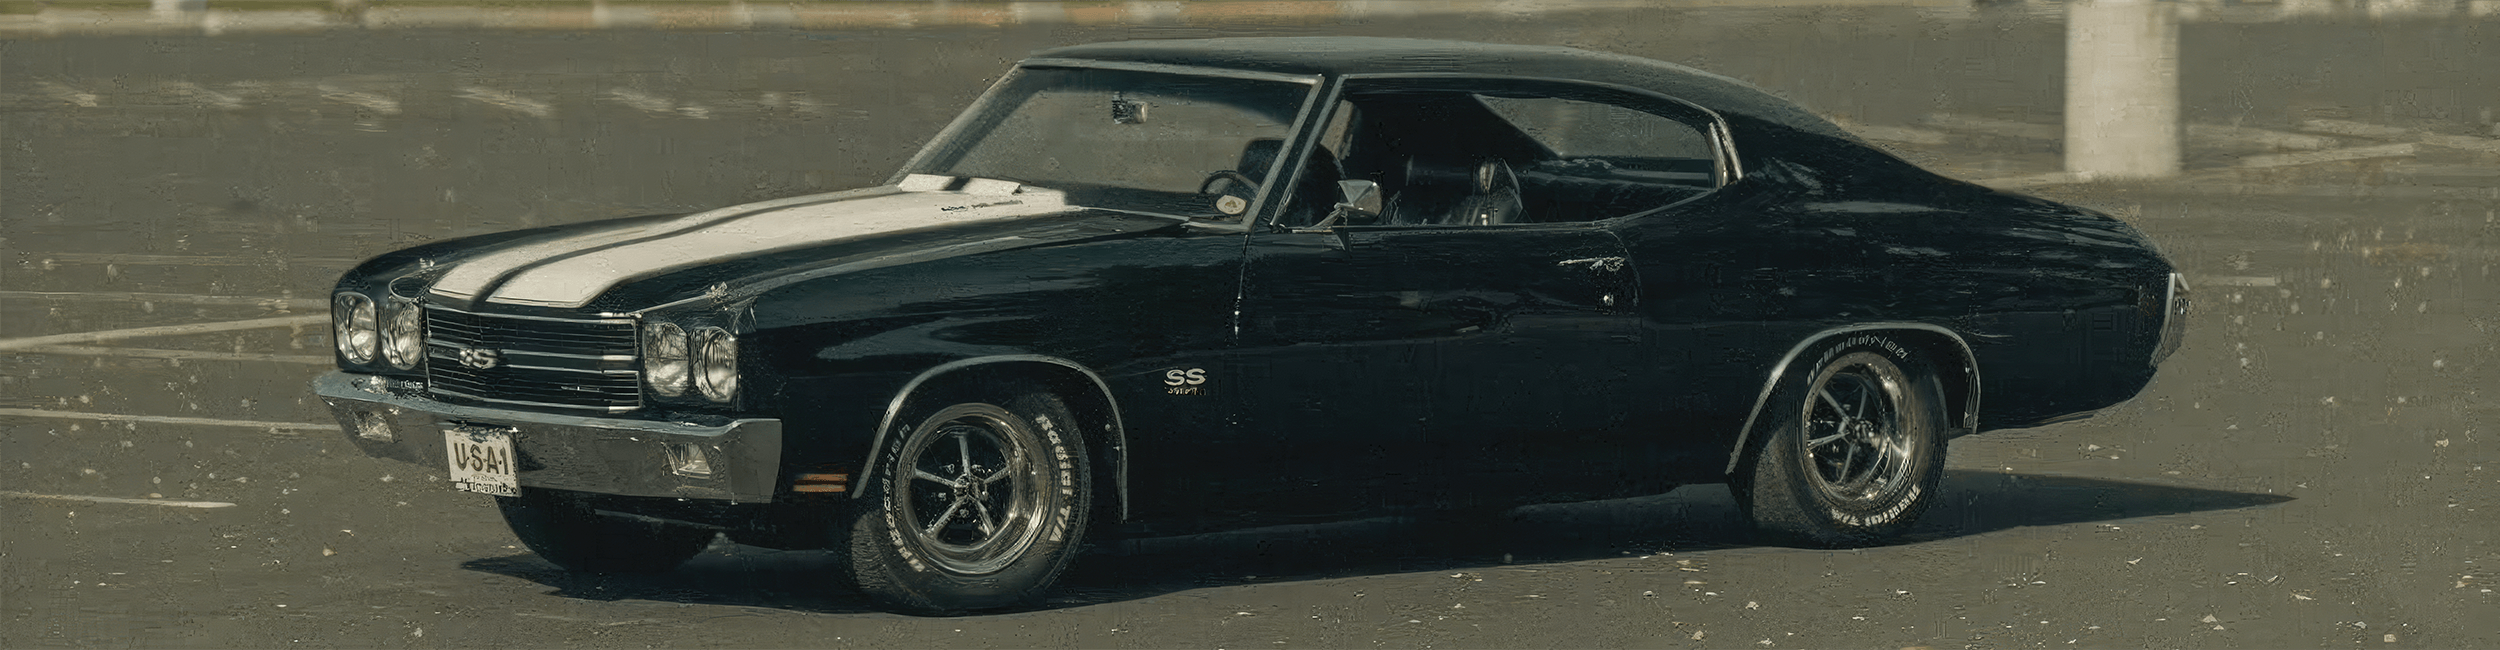 1970 Chevelle powered by BluePrint Engines